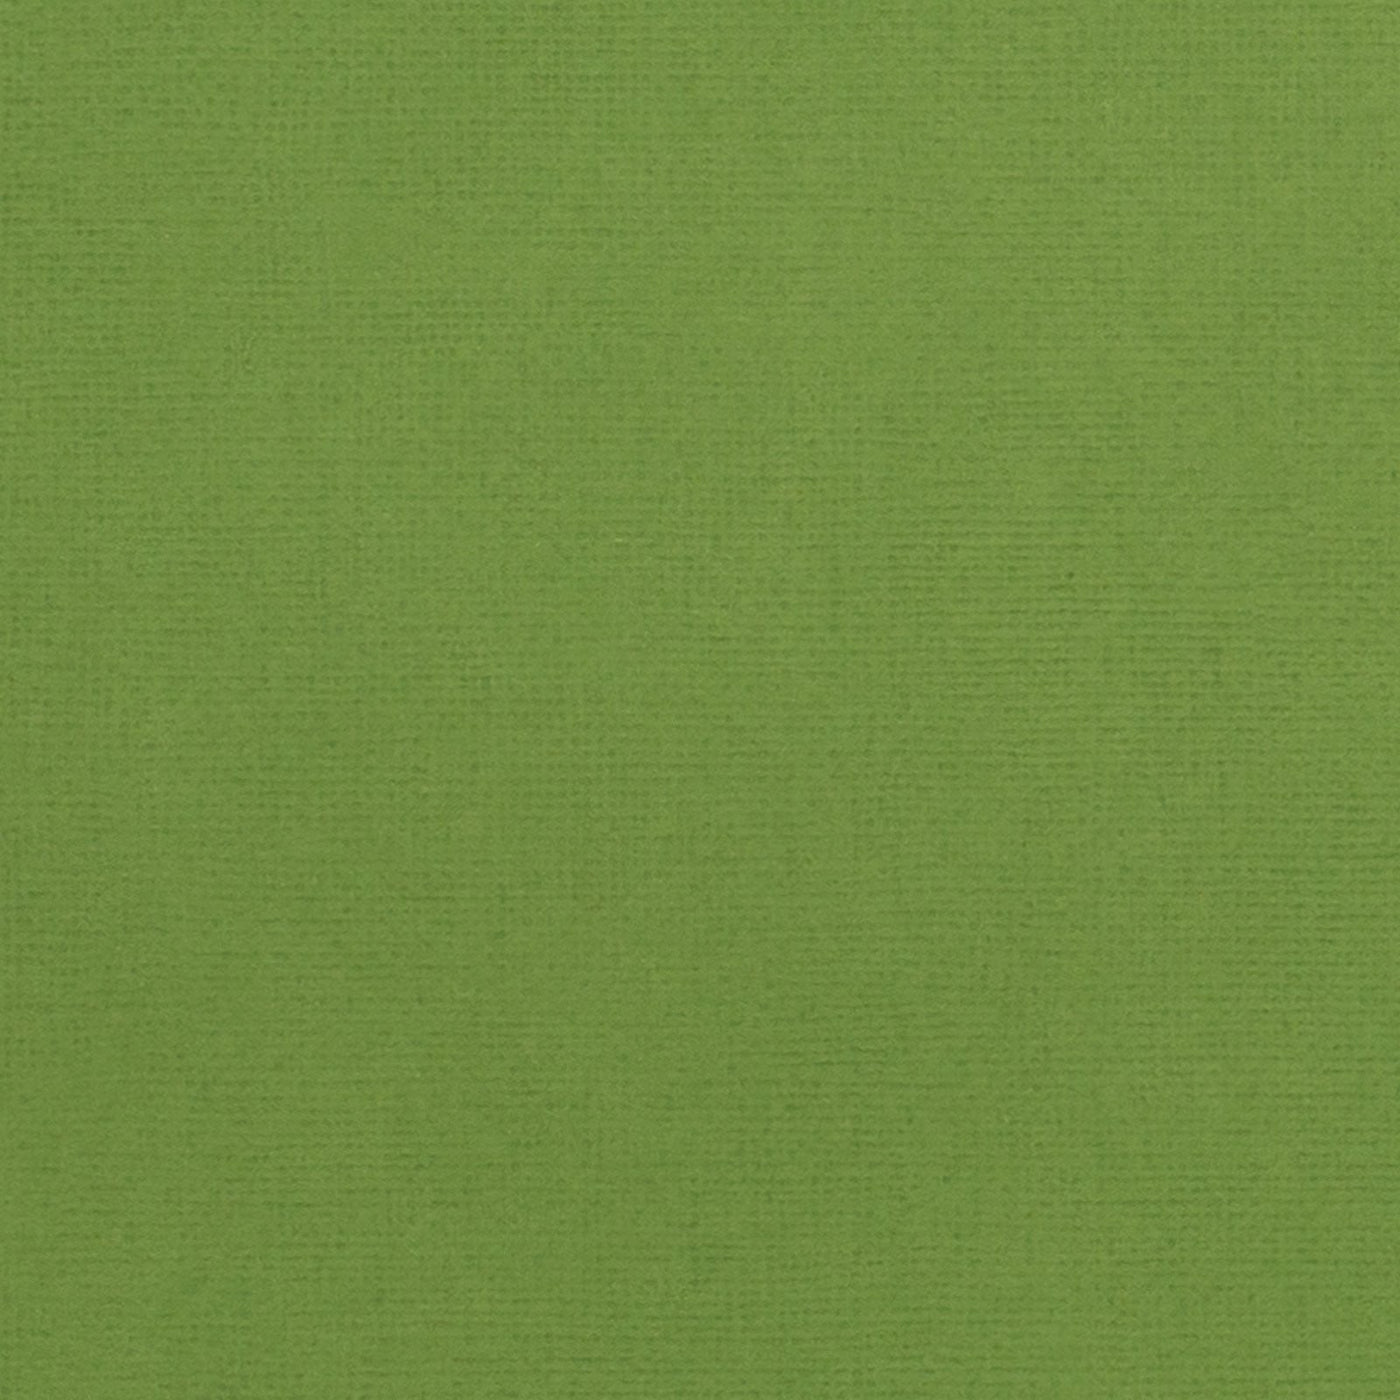 Spinach - green cardstock - 12x12  inch - 80 lb - textured scrapbook paper - American Crafts